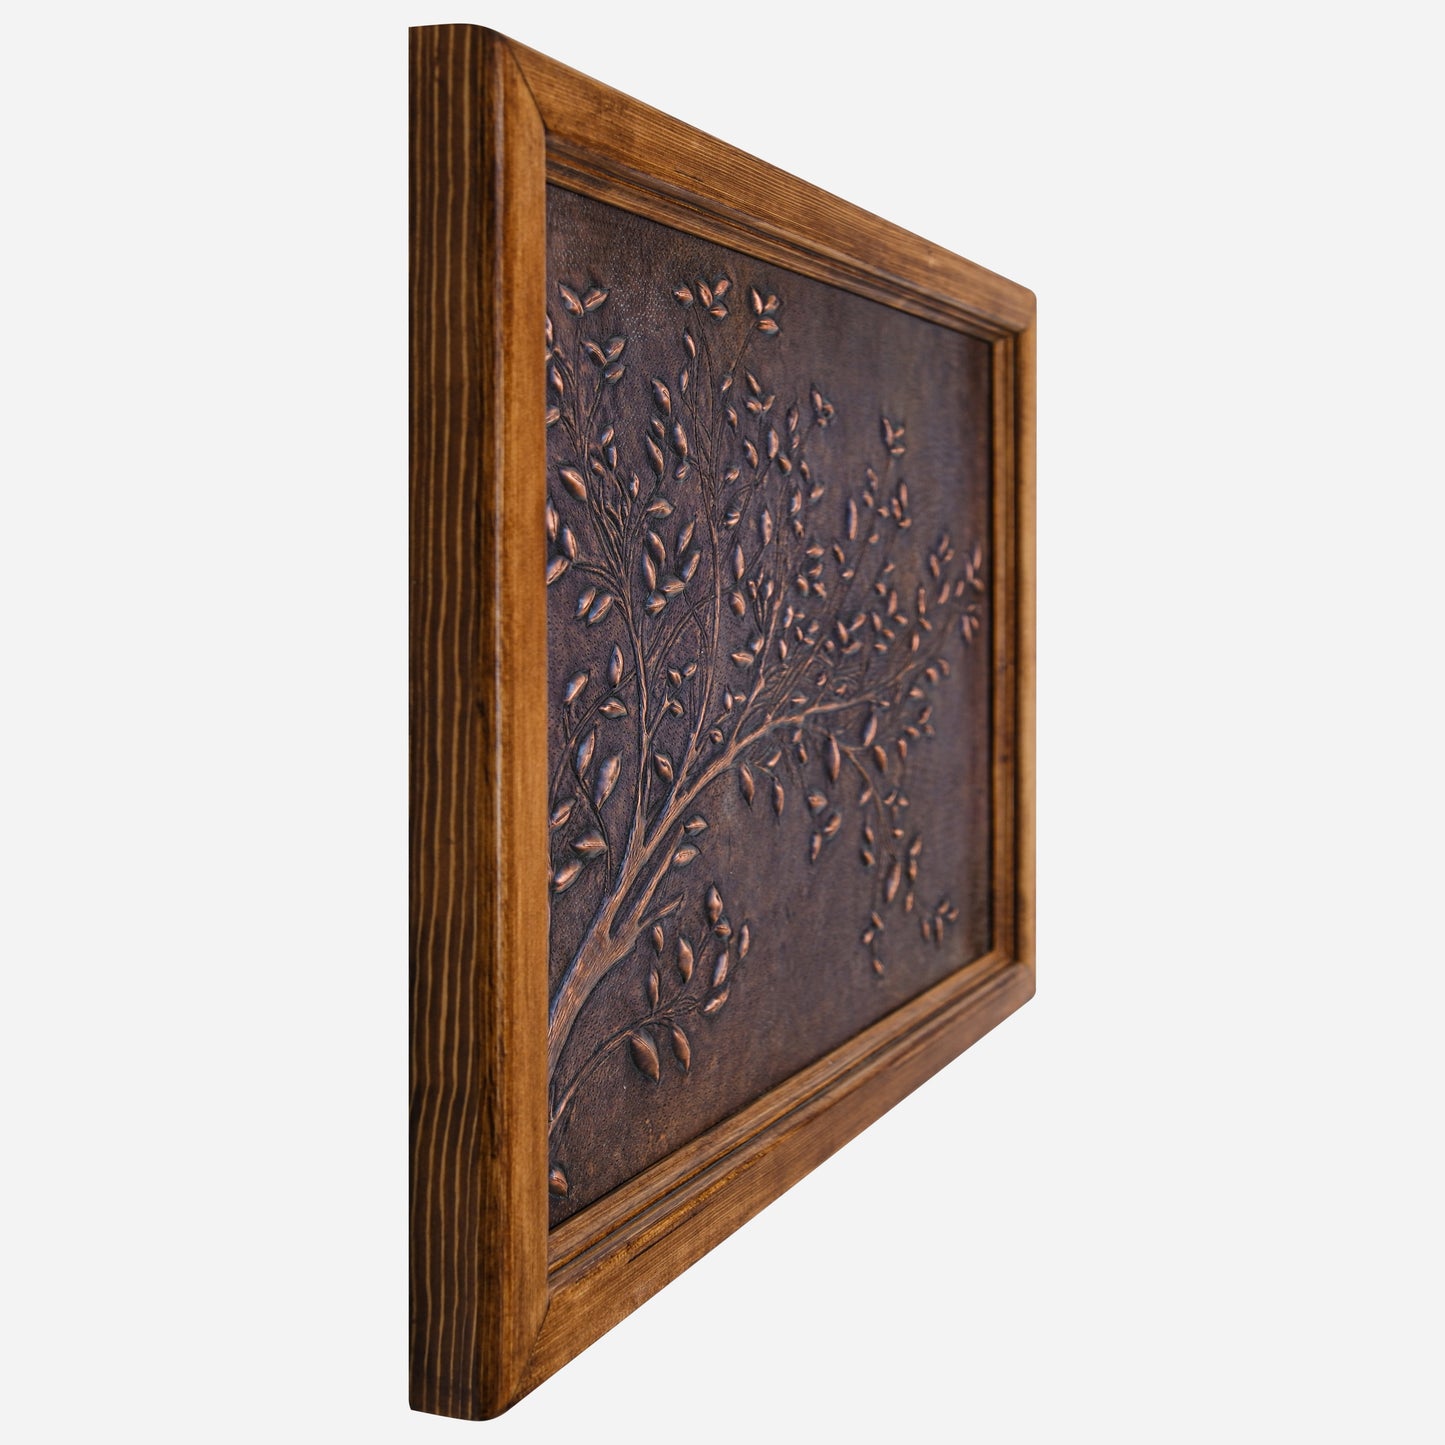 Framed Copper Artwork (Tree Branches, Brown Patina)